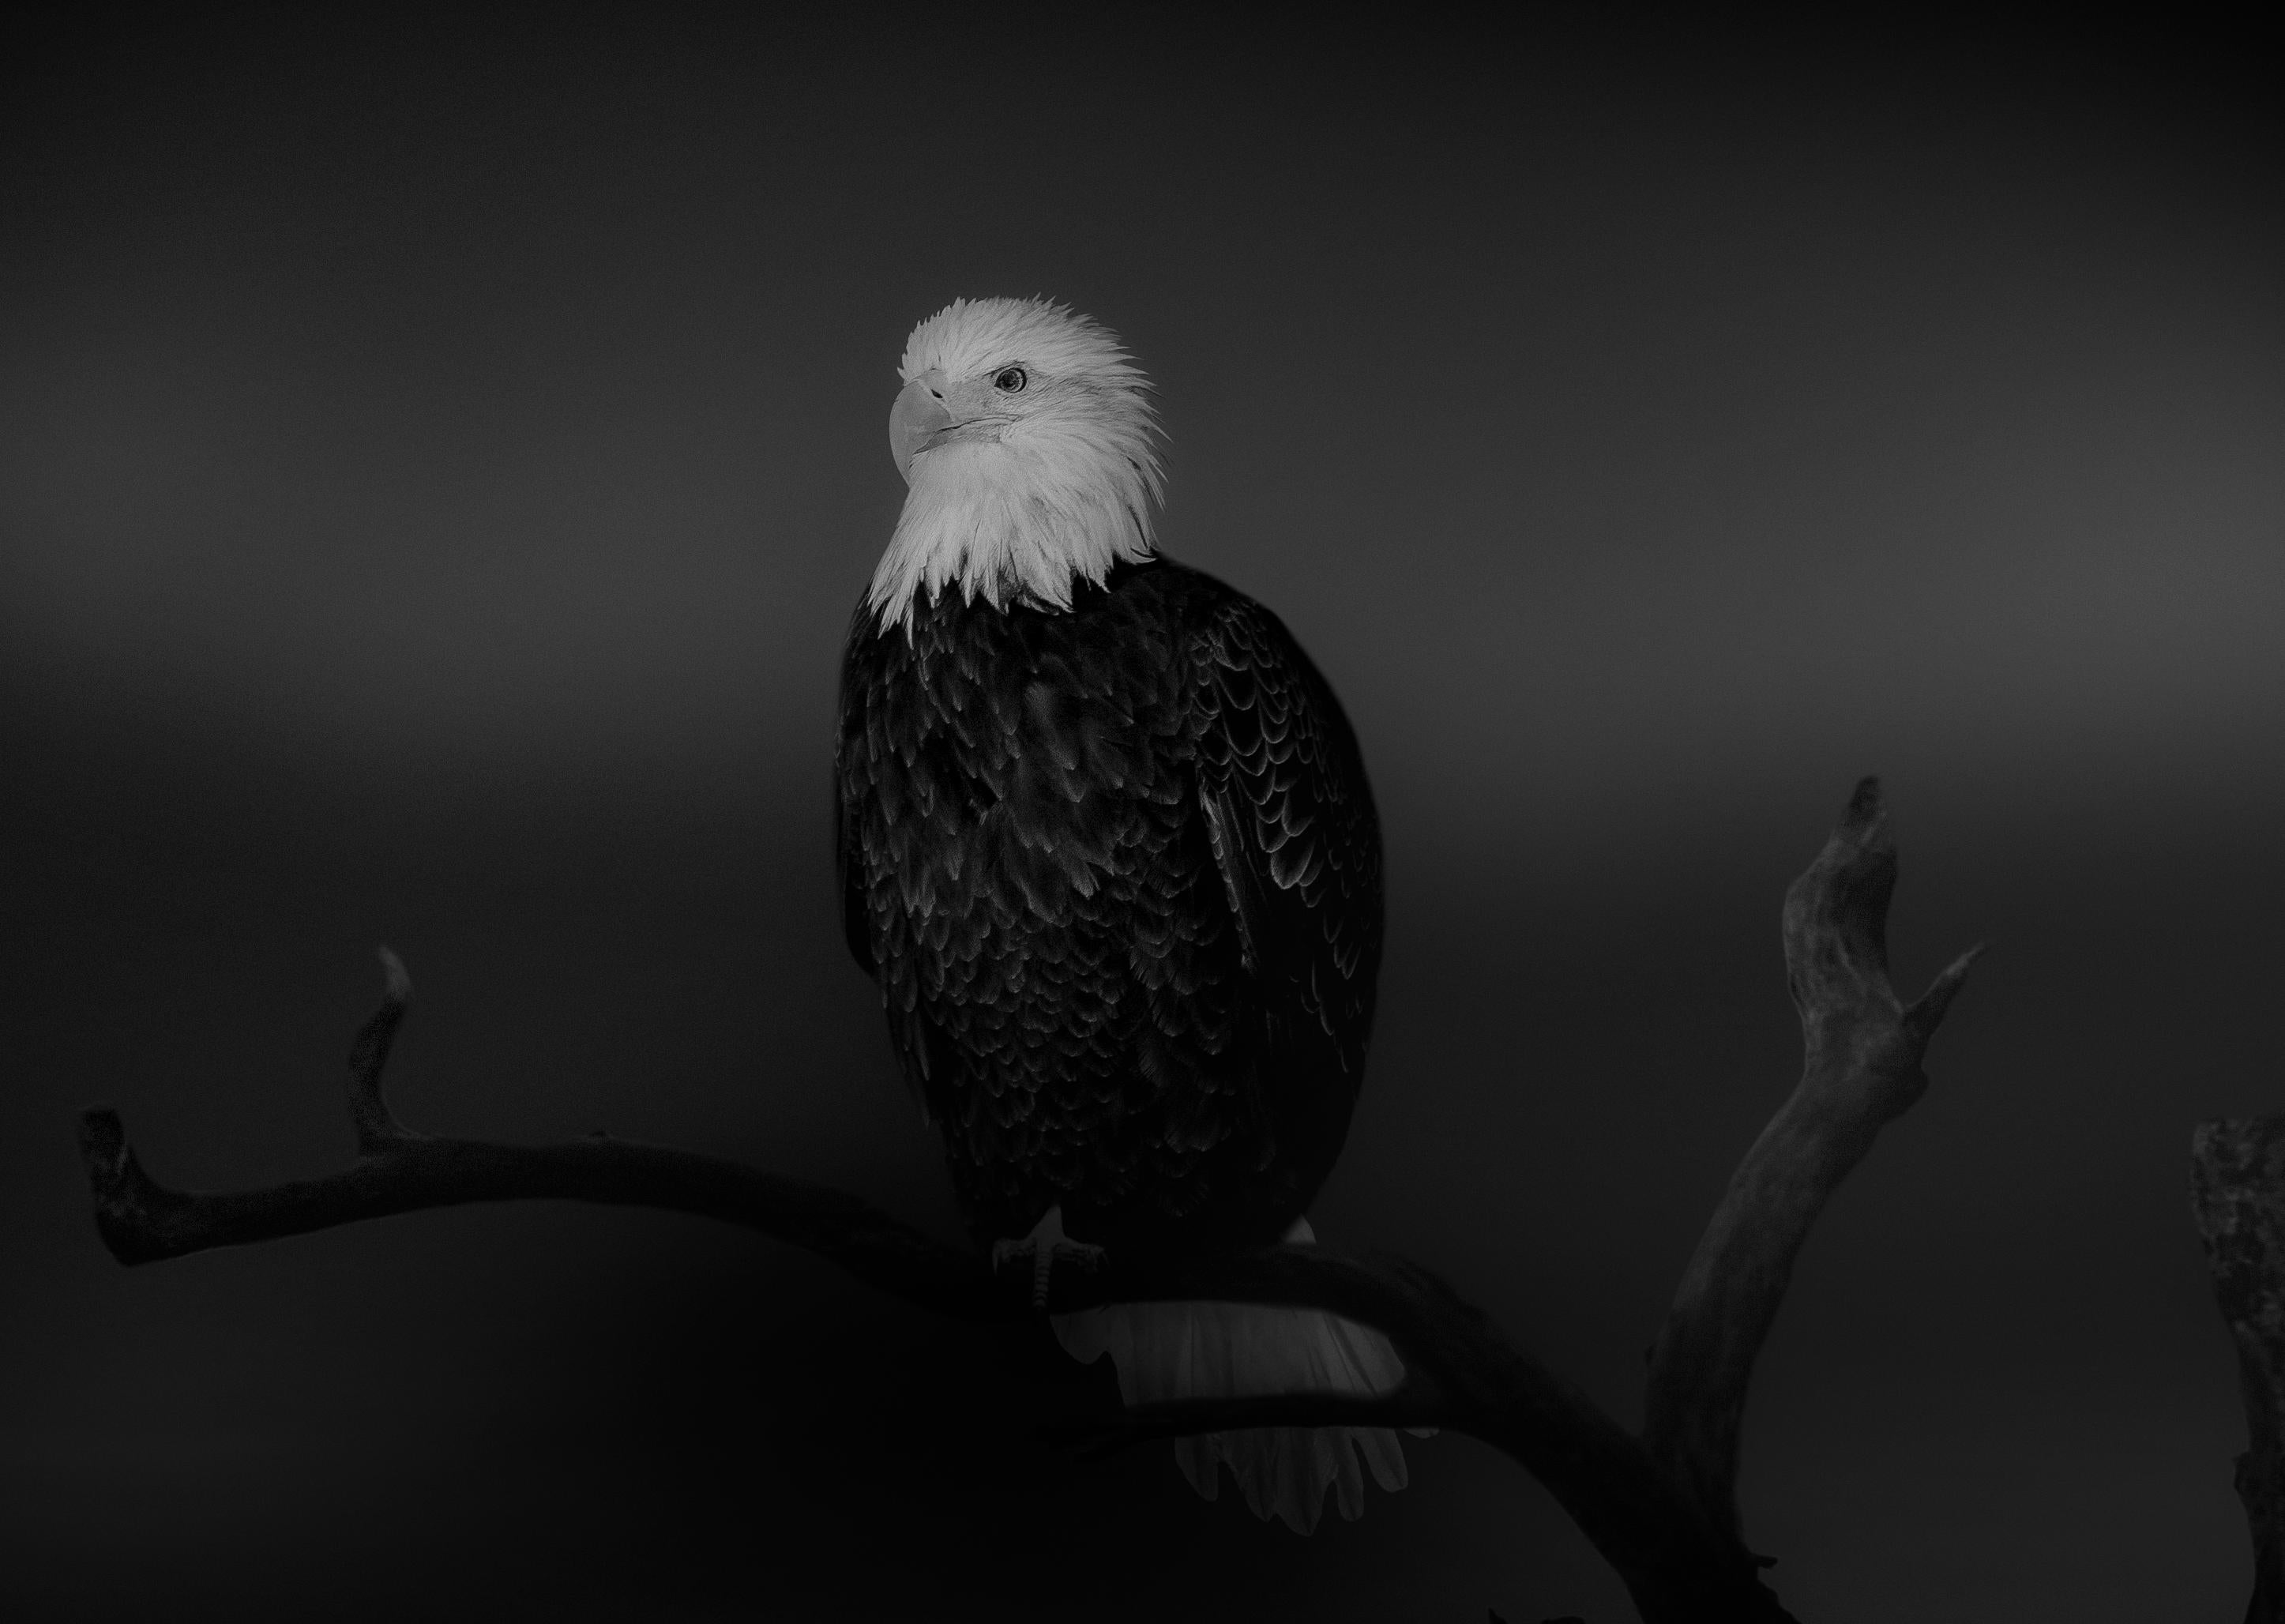 Shane Russeck Black and White Photograph - "Bald Eagle" 36x48 - Black & White Photography, Photograph Unsigned  Print